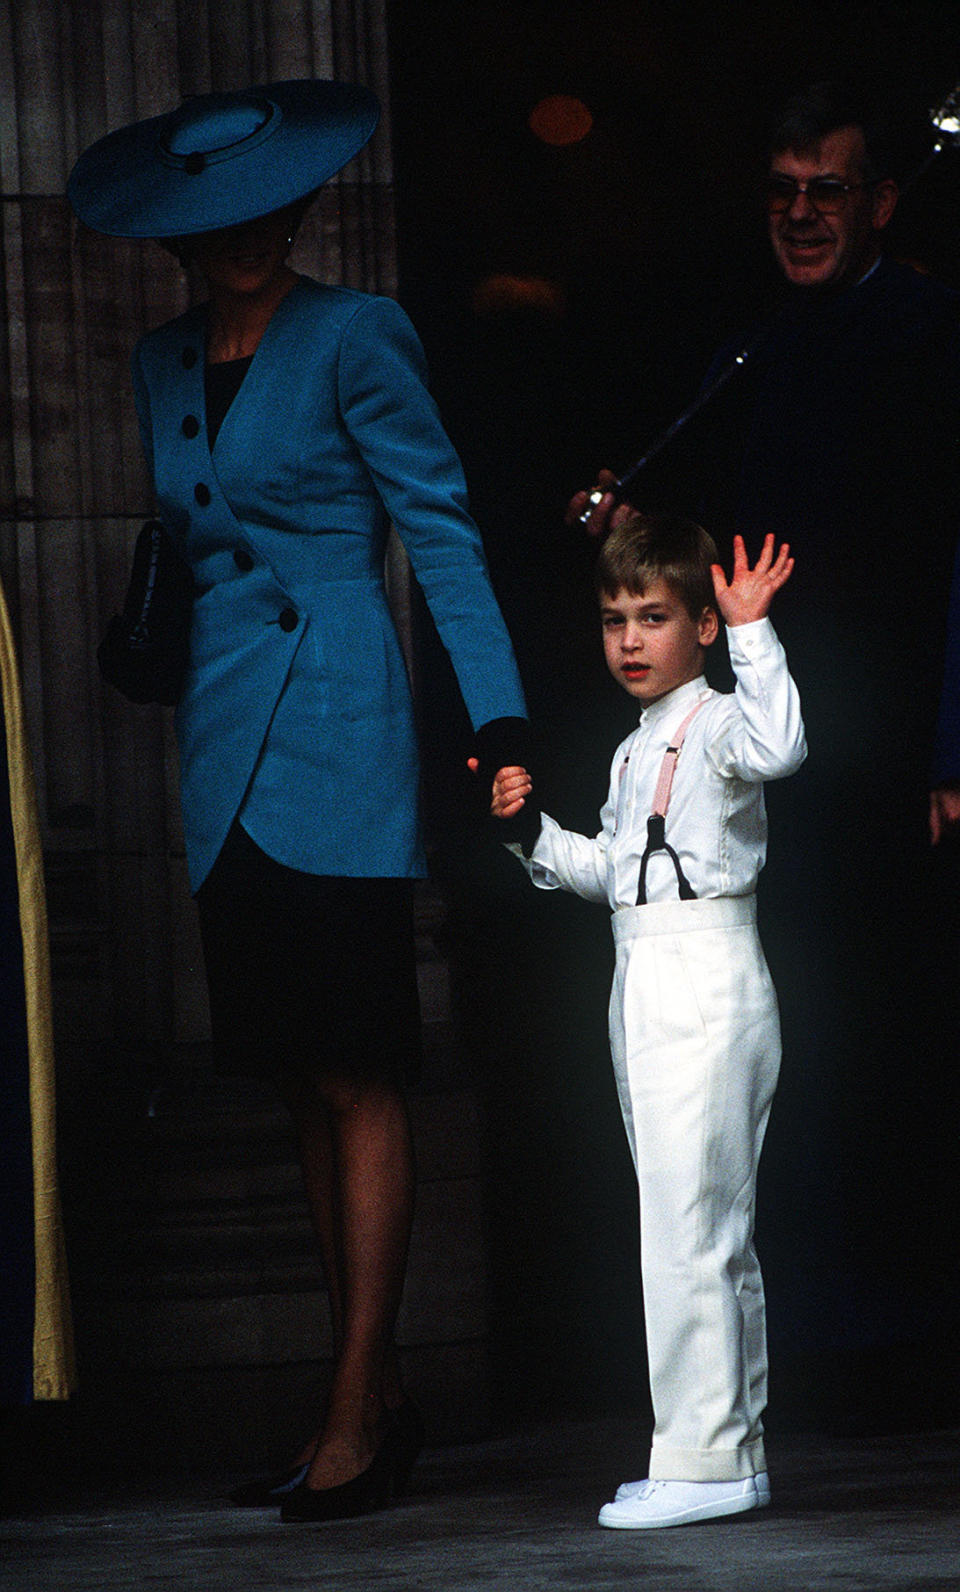 Princess Diana&nbsp;leads&nbsp;Prince William along as he waves to onlookers.